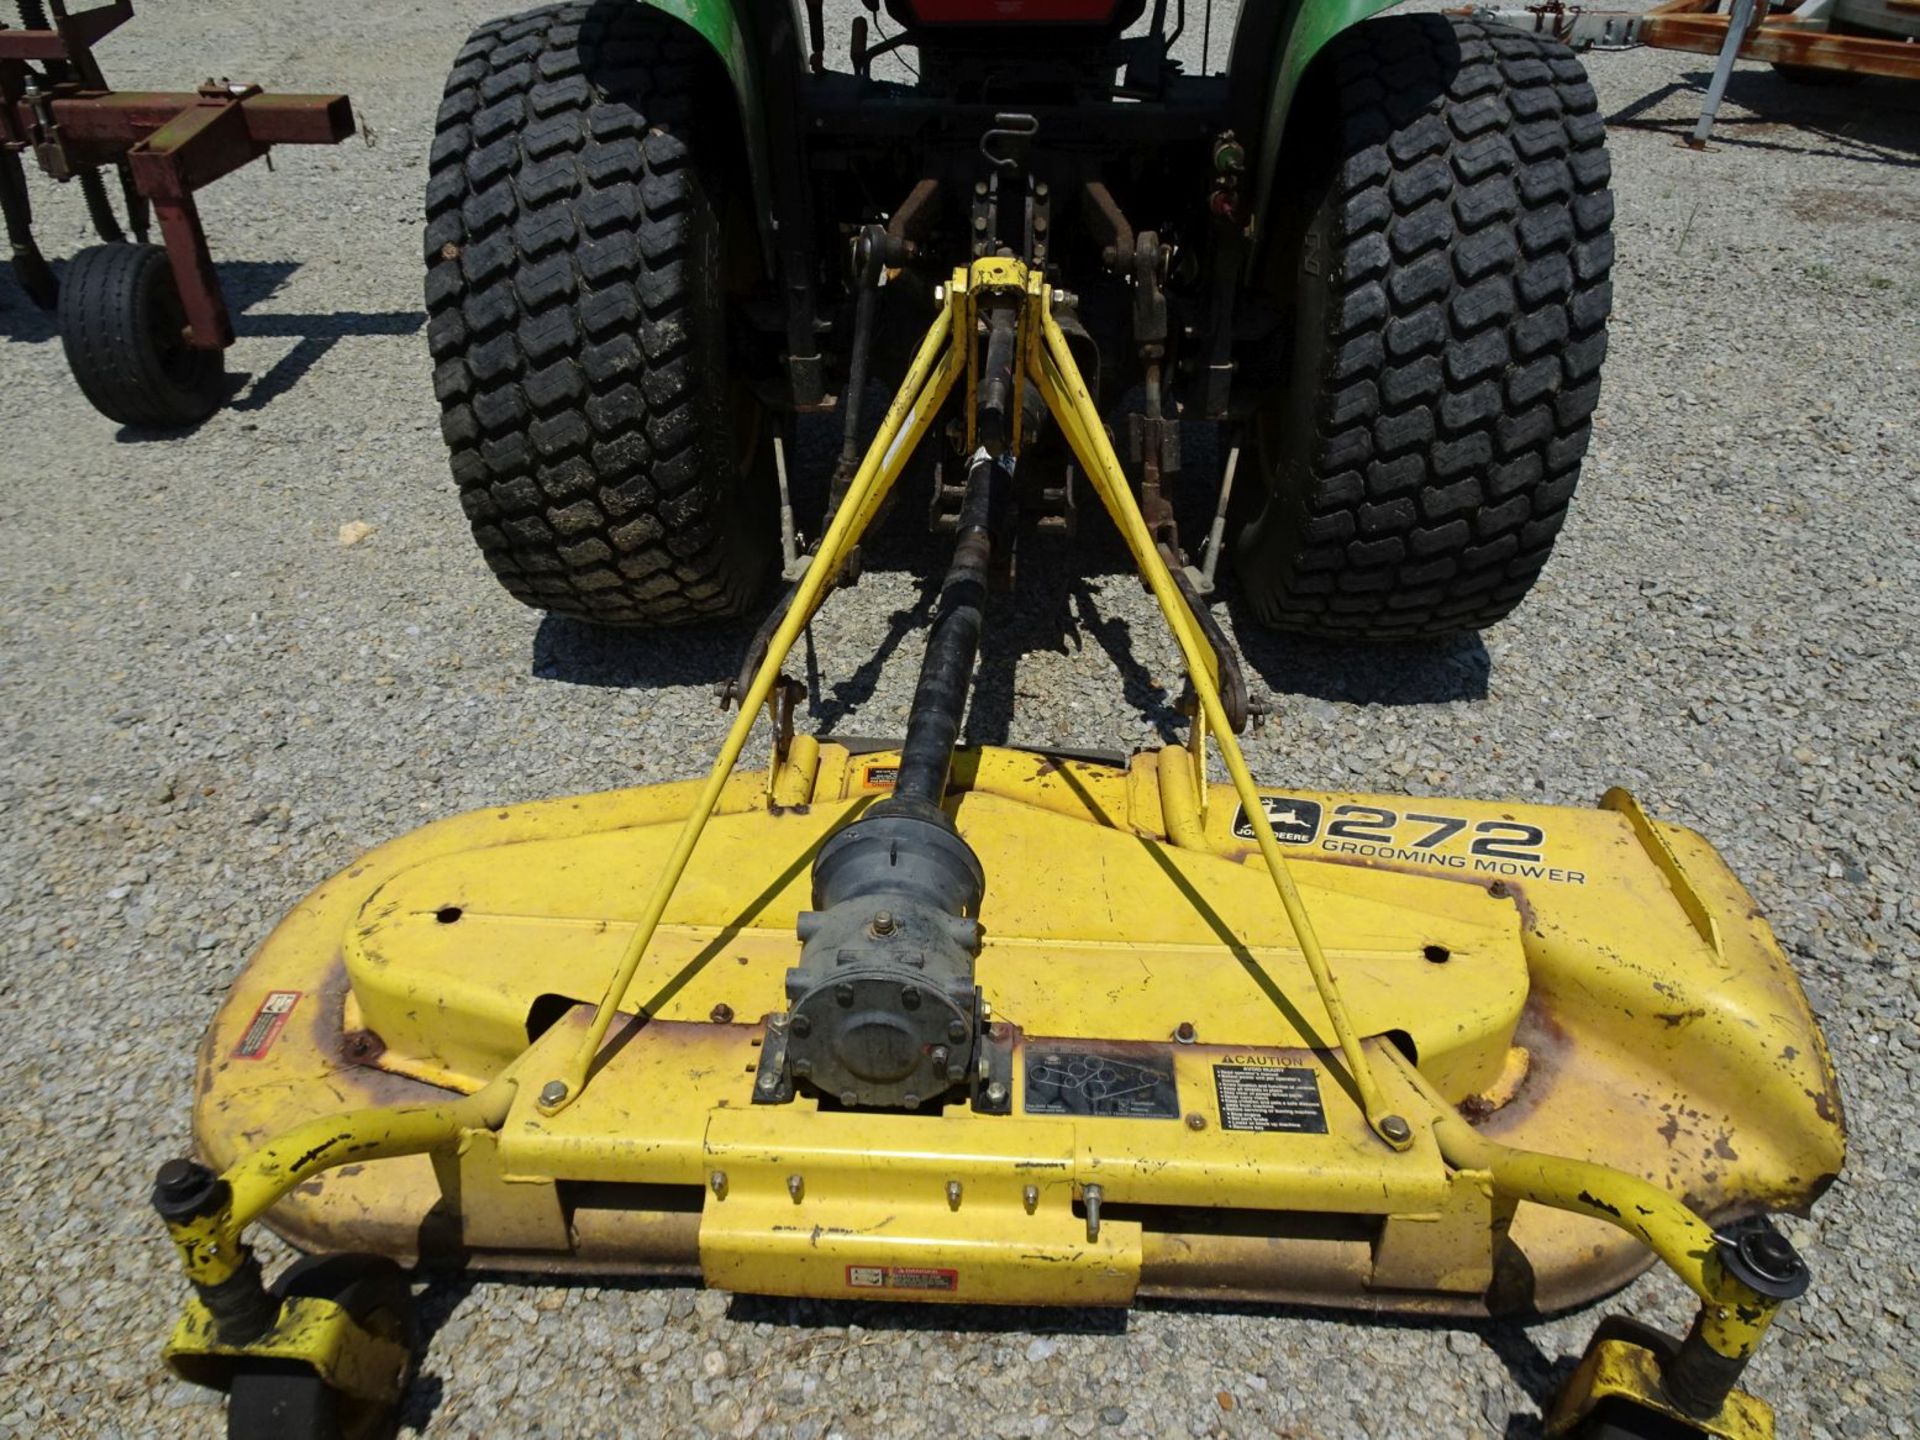 John Deere Model 272 y72" Grooming / Finish Mower Class 1 3 Point Hitch and PTO Drive Shaft - Image 8 of 10